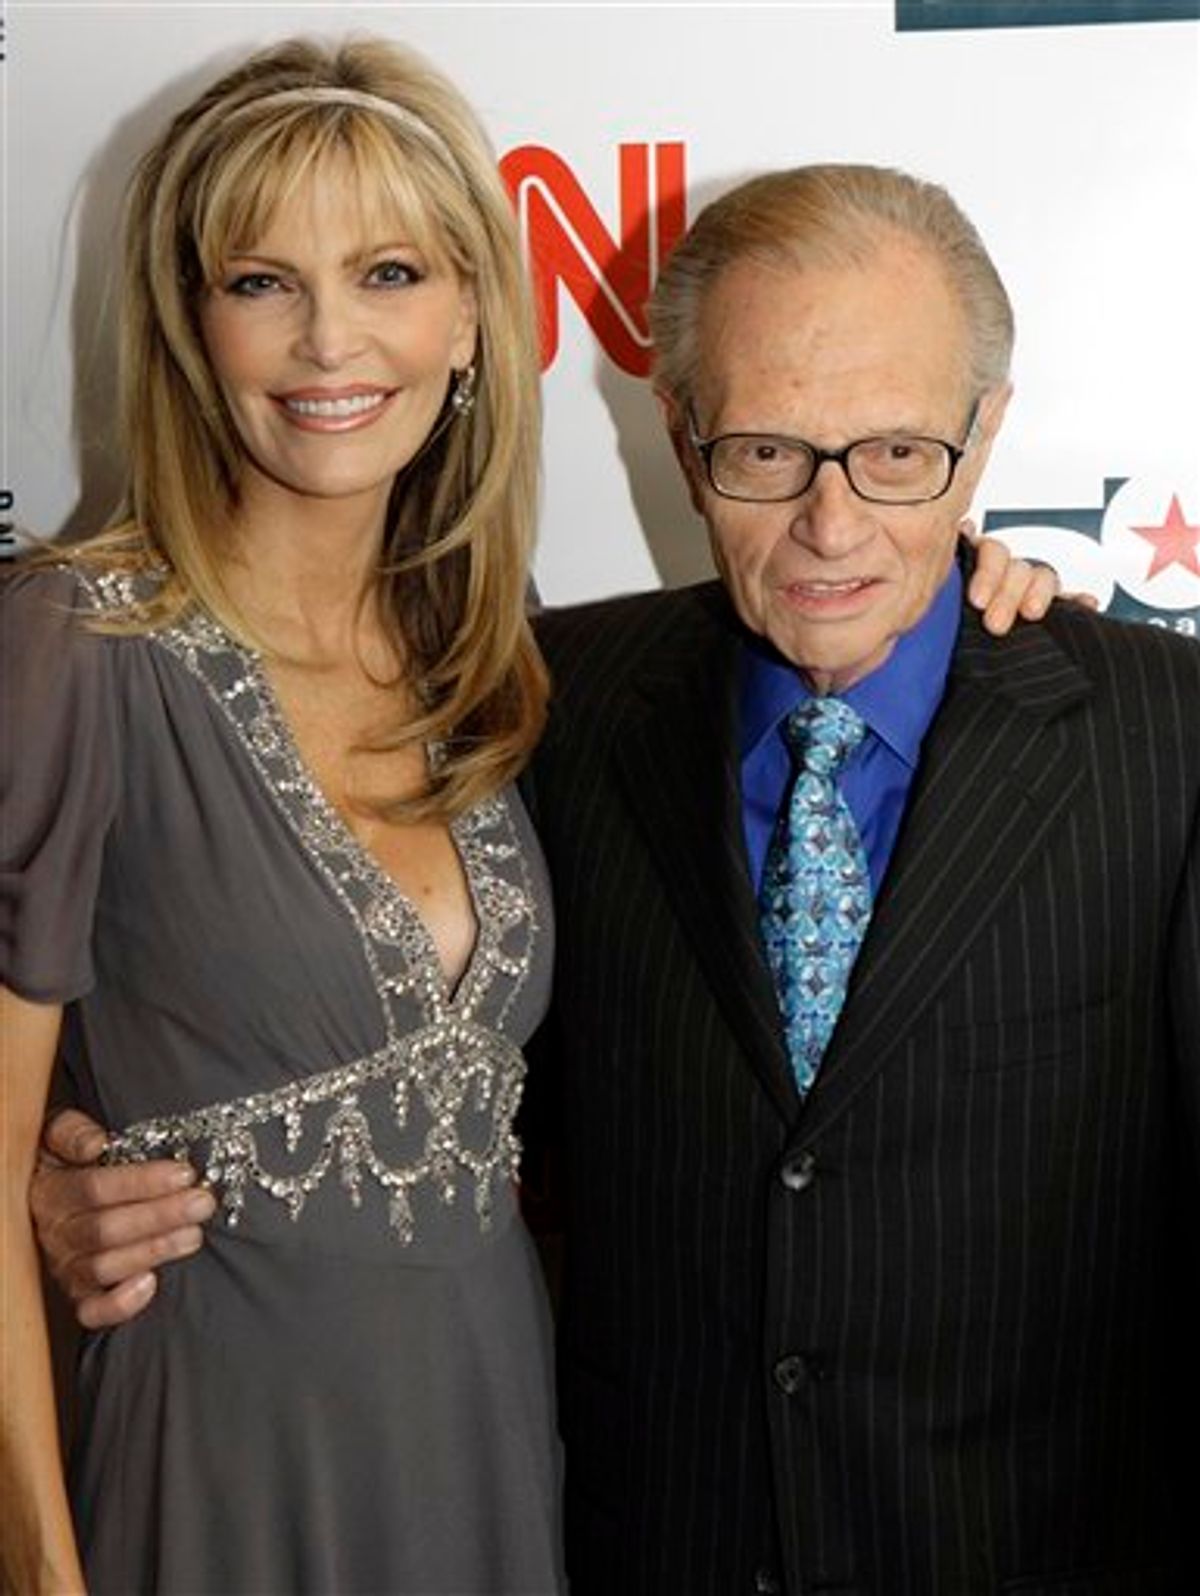 FILE - In this April 18, 2007 file photo, Larry King and his wife Shawn arrive to a party held by CNN celebrating King's fifty years of broadcasting, New York. ( AP Photo/Stuart Ramson, file) (AP)